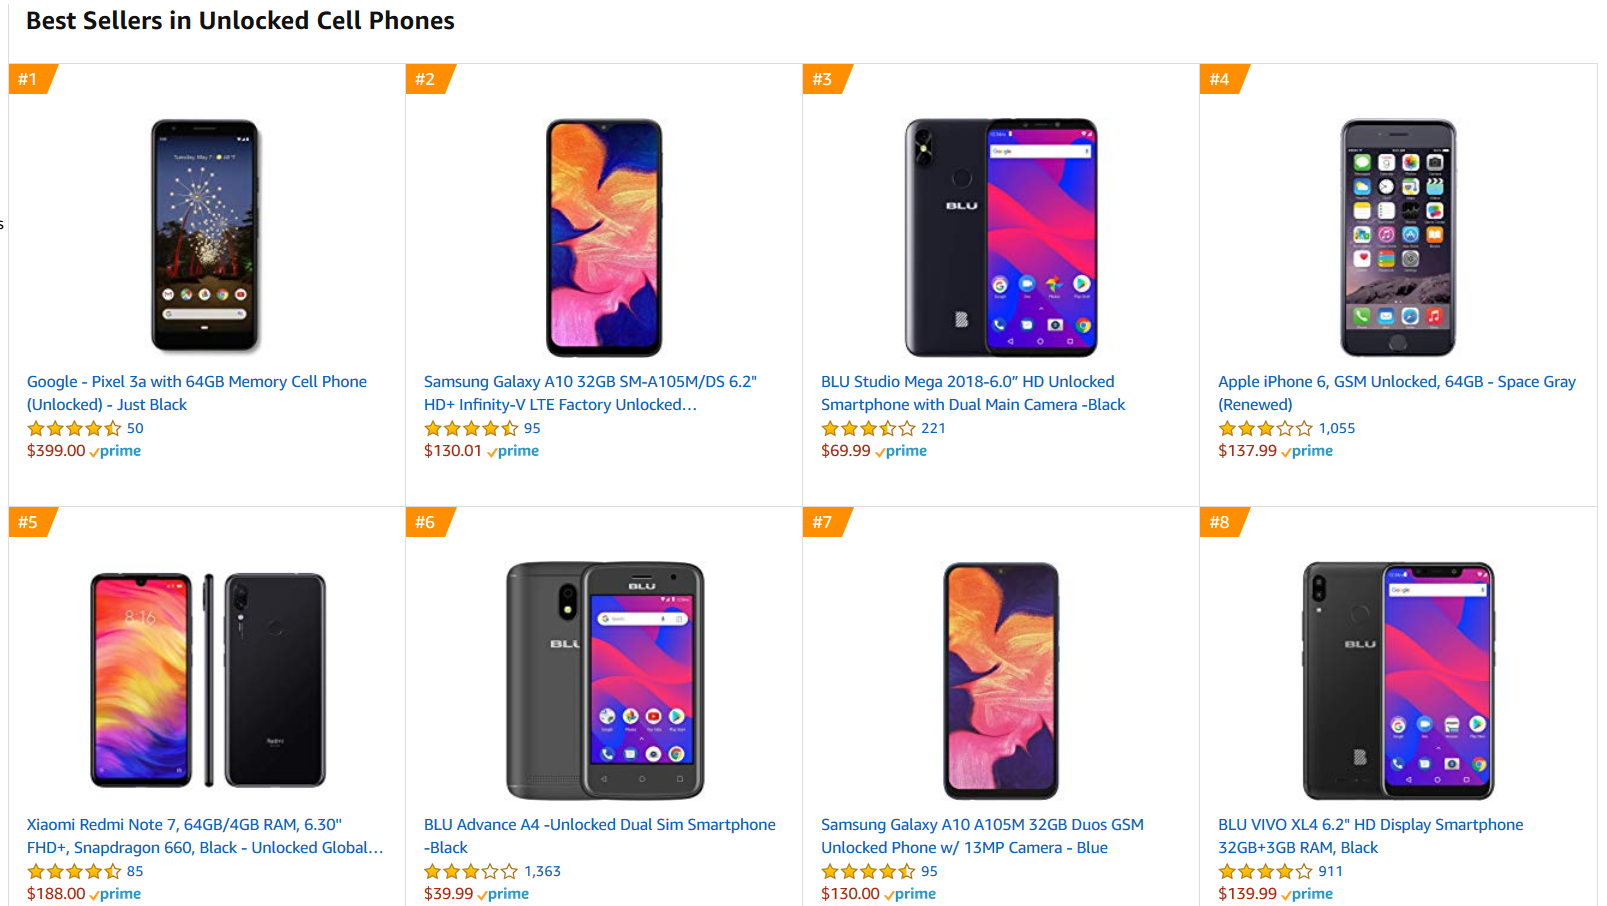 Pixel 3a is the best selling unlocked phone at Amazon - The best-selling unlocked phone at Amazon might surprise you